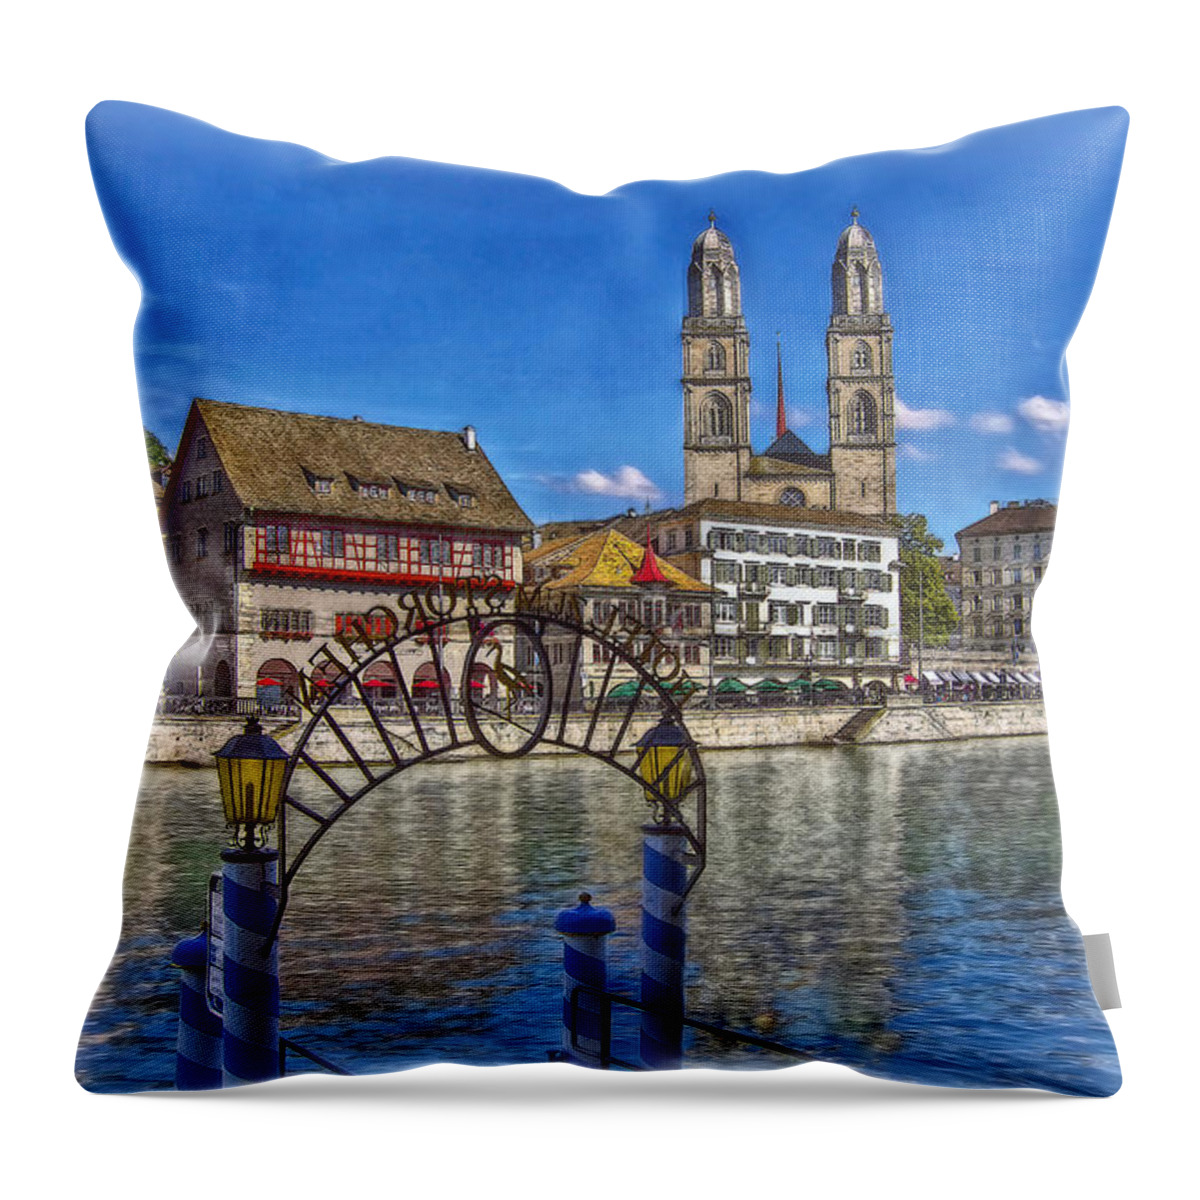 Switzerland Throw Pillow featuring the photograph The Limmat City by Hanny Heim